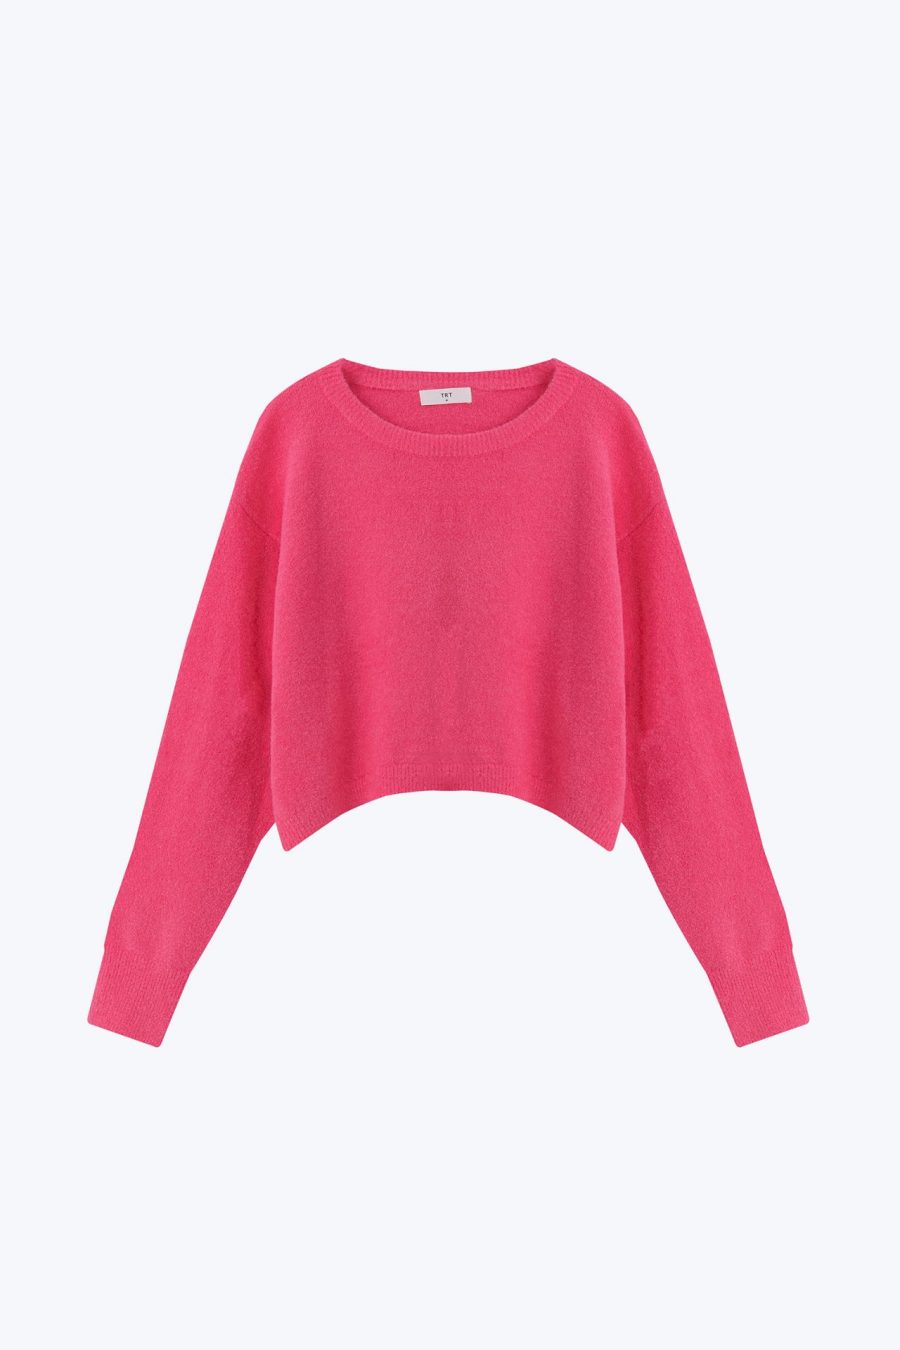 CKL001175S Knitted Textured Sweater HOT PINK